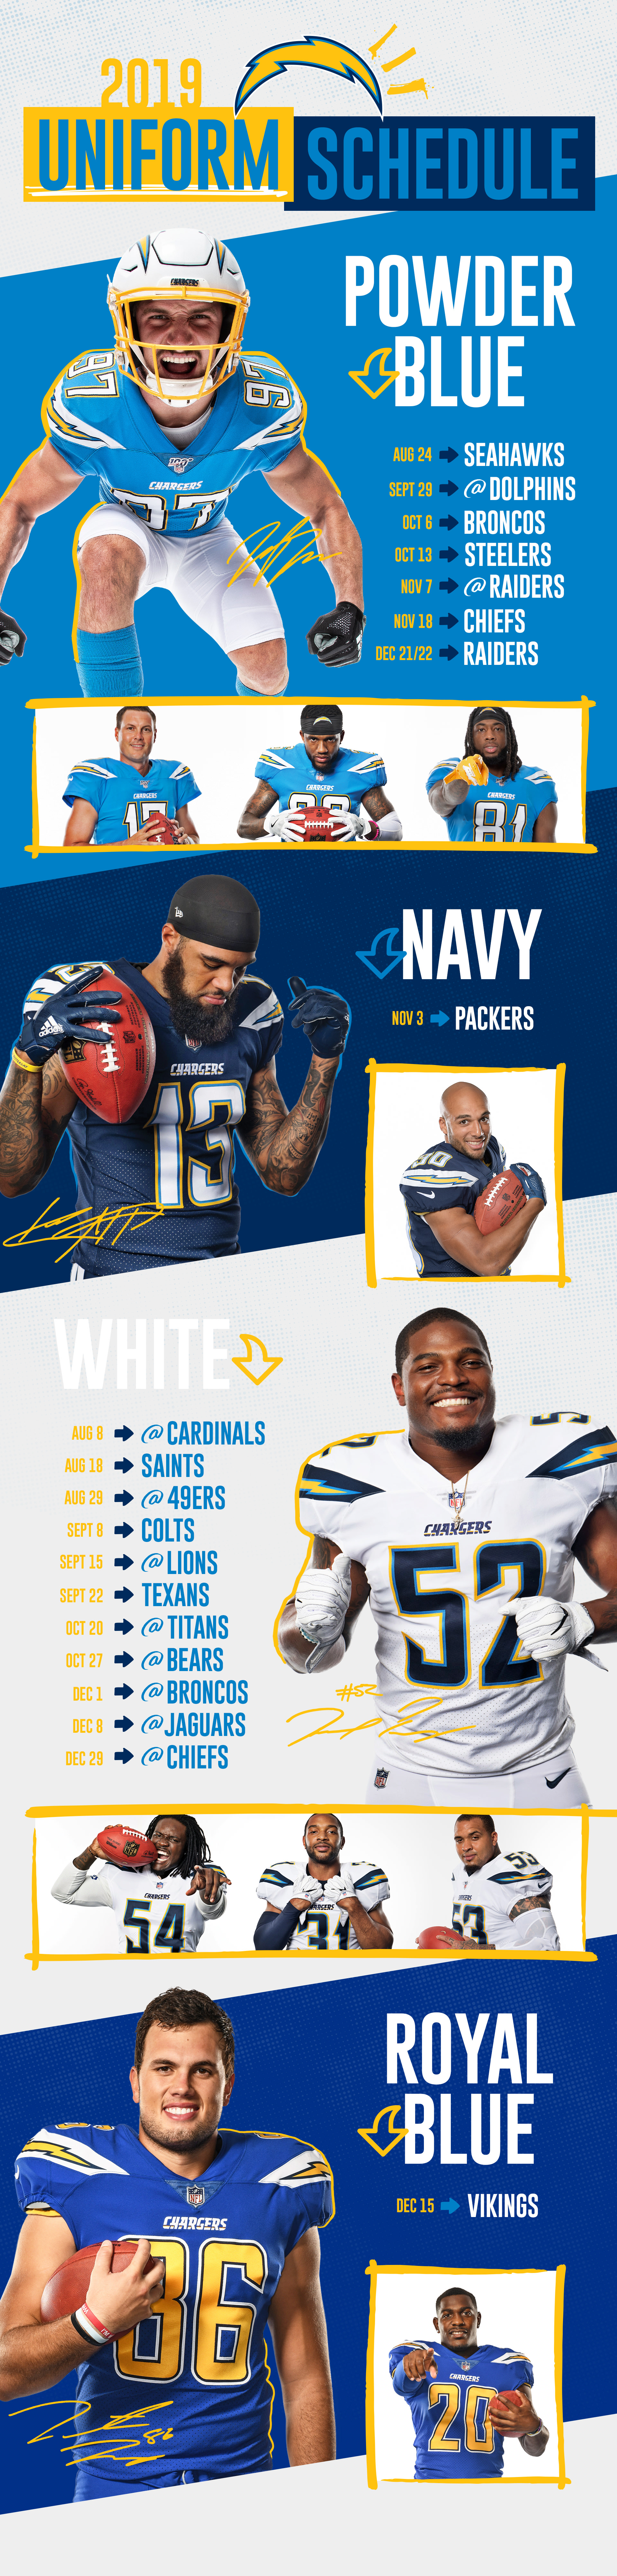 Chargers Official Site | Los Angeles Chargers - chargers.com1920 x 8016